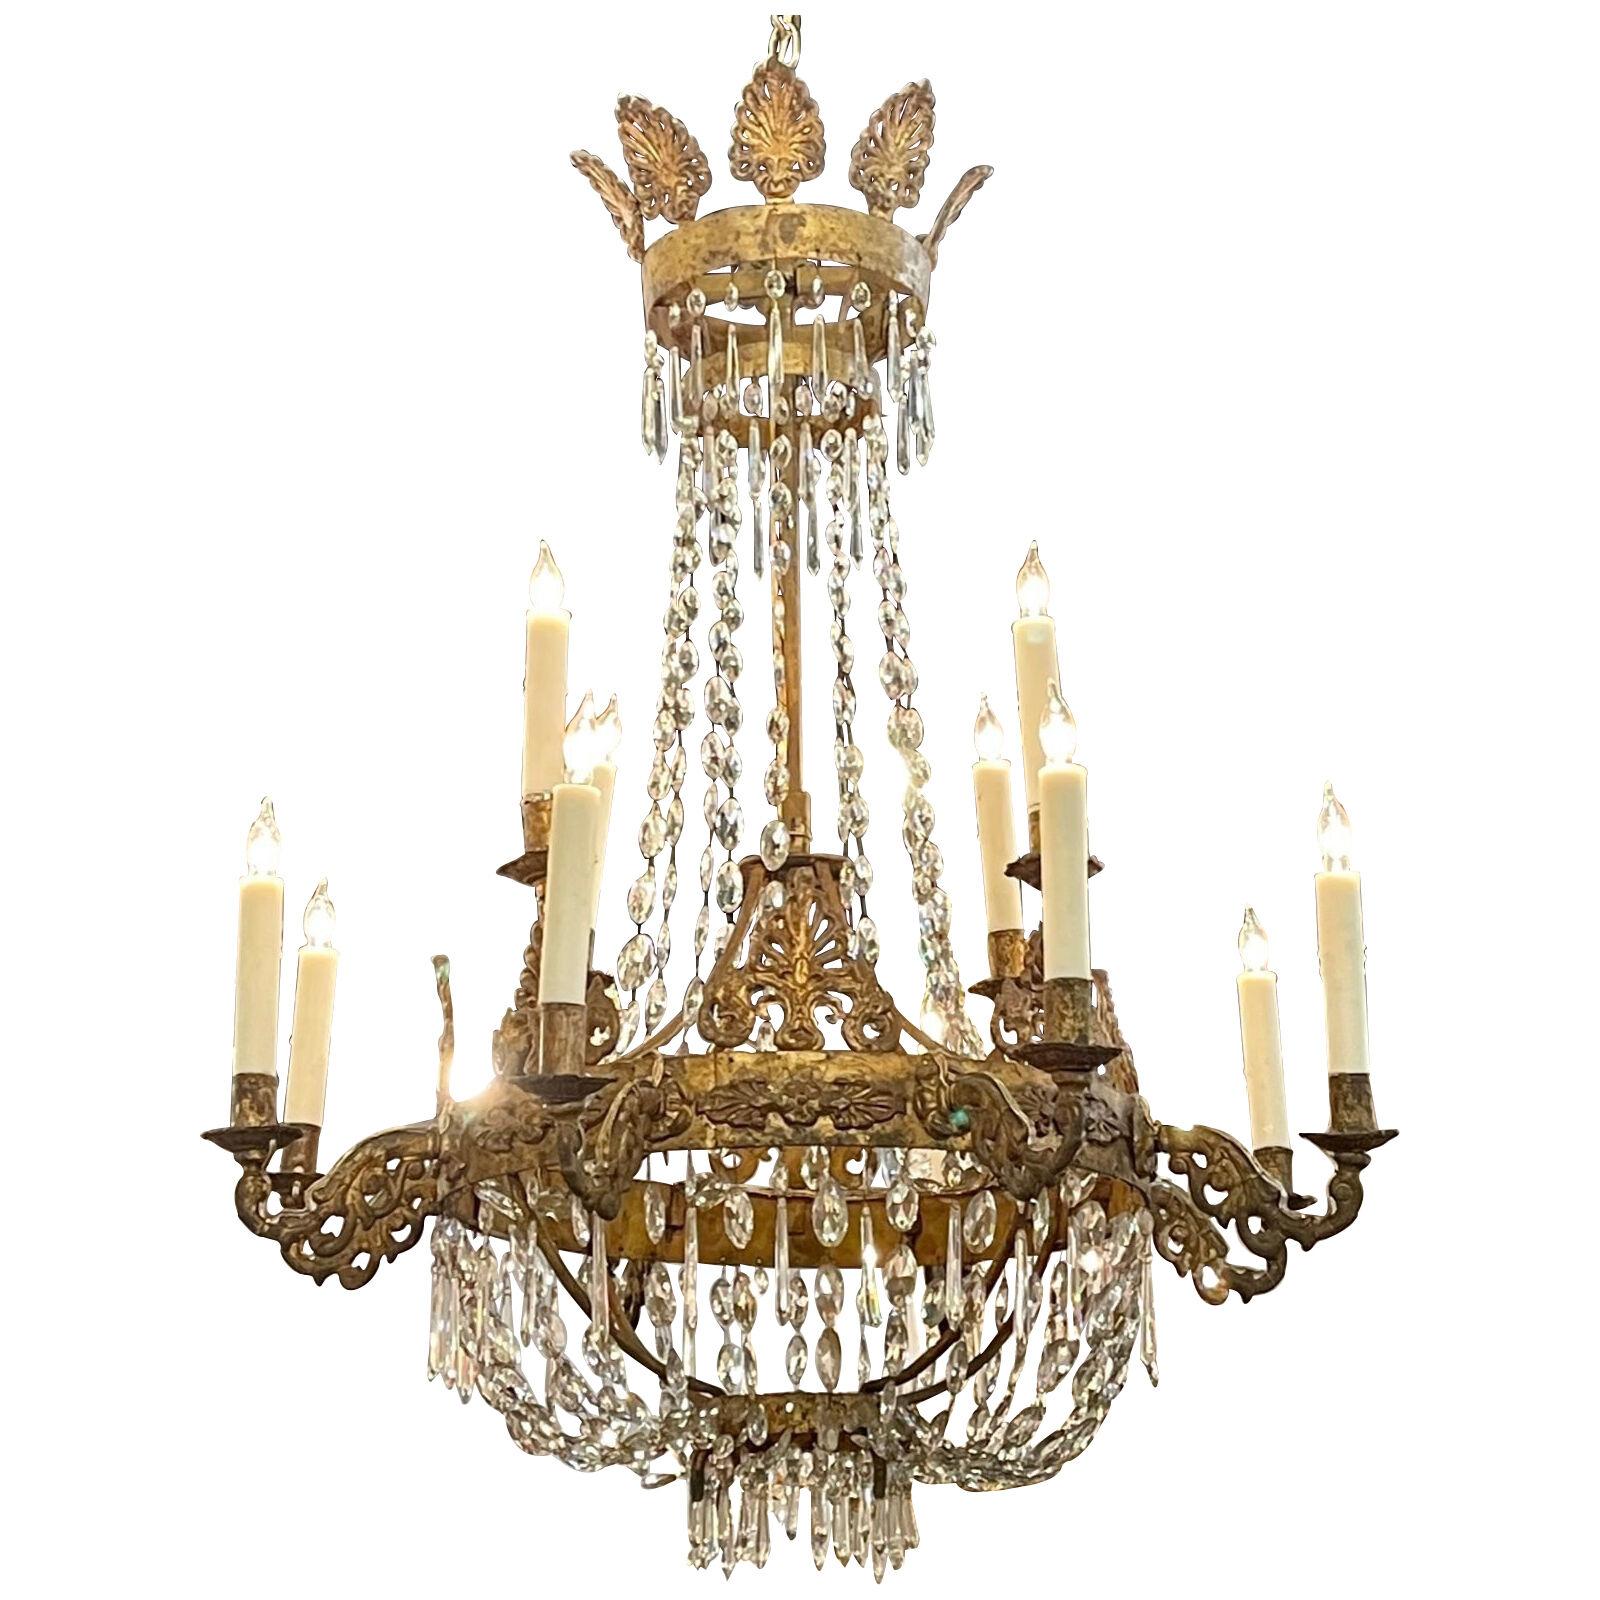 18th Century Italian Gilt Iron and Crystal Chandelier with 11 Lights